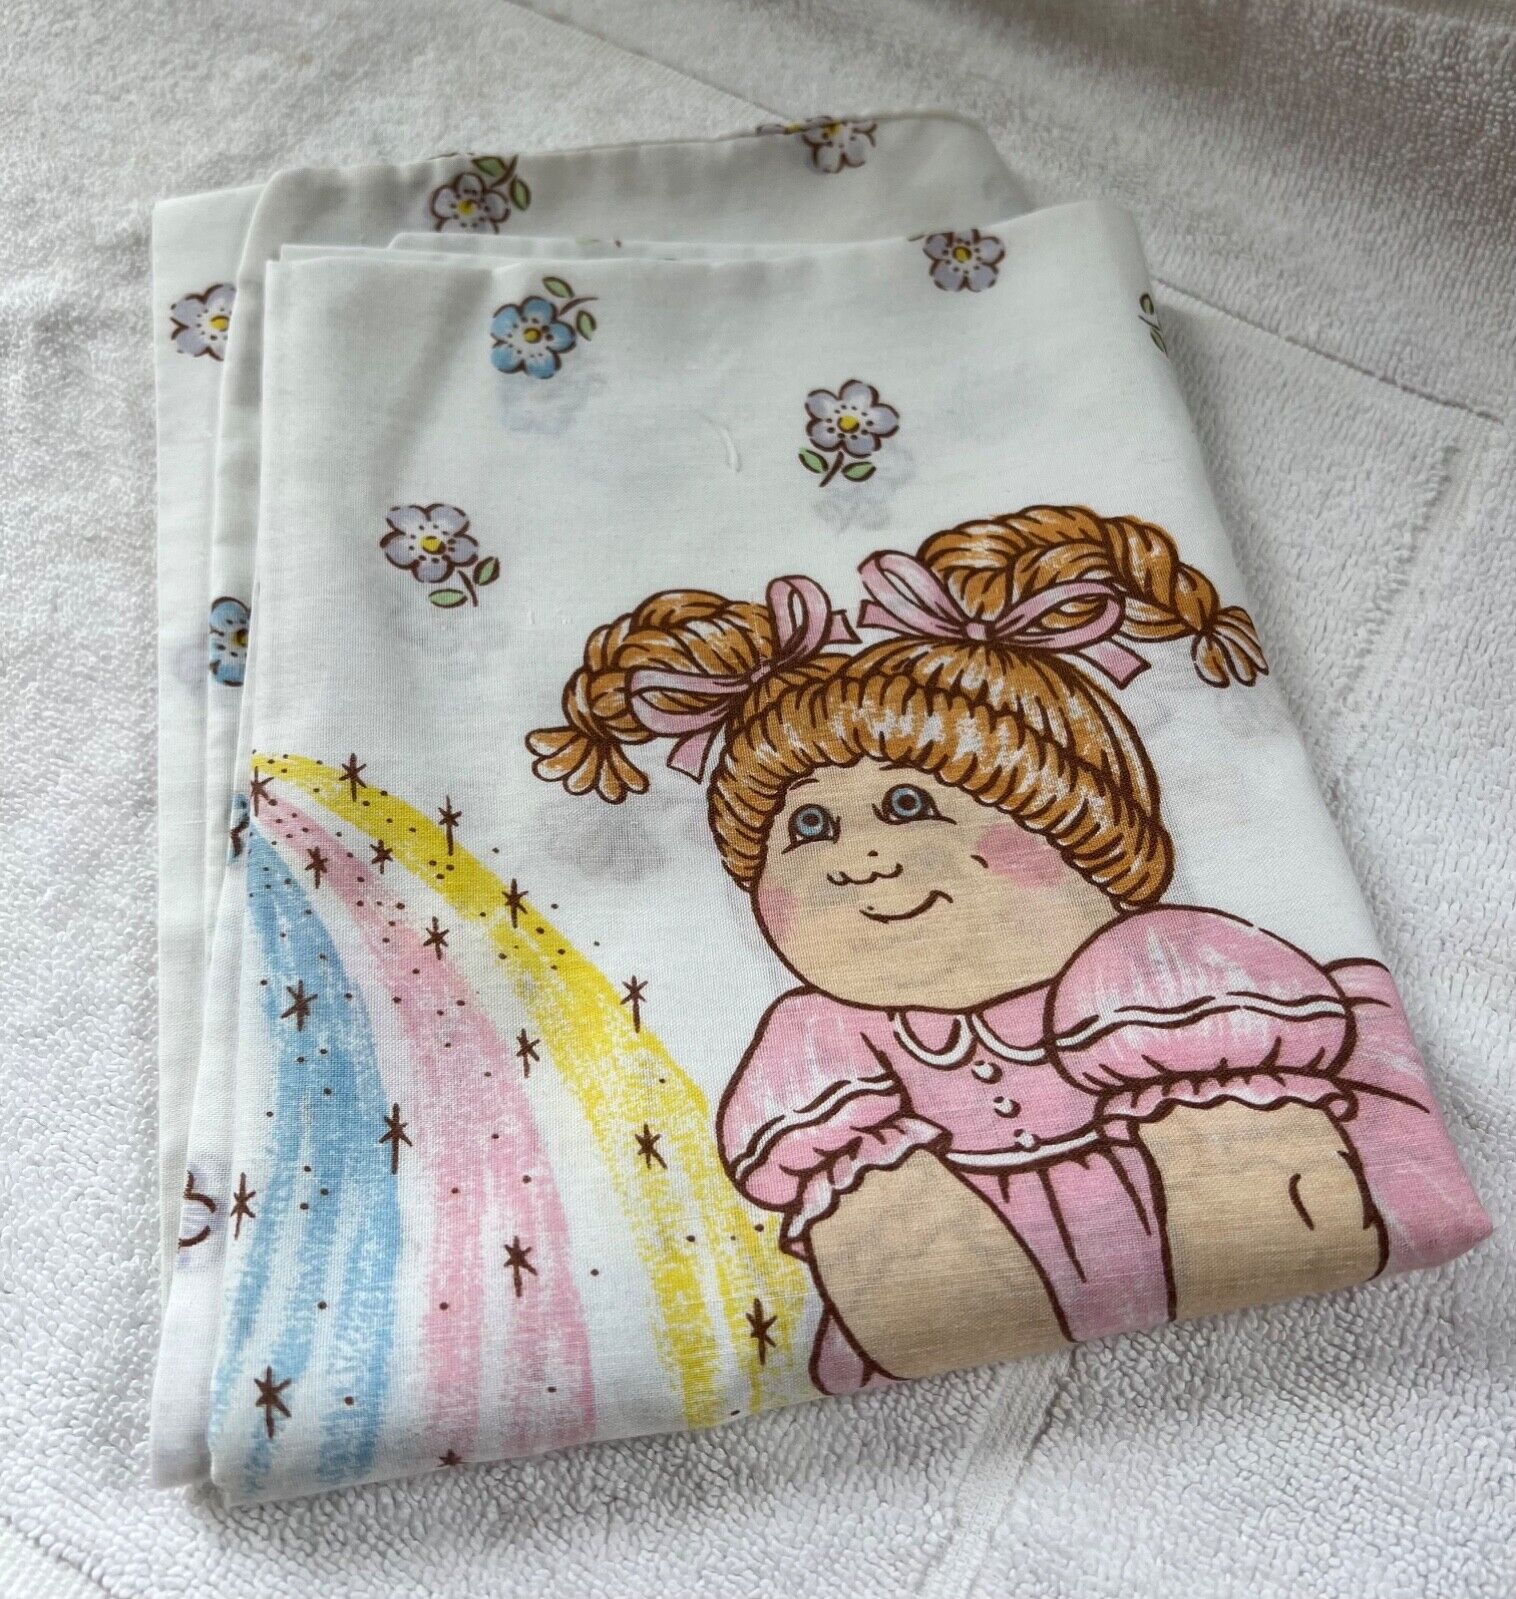 1983 Pillow Case Cabbage Patch Kids Vintage Cover Great Condition